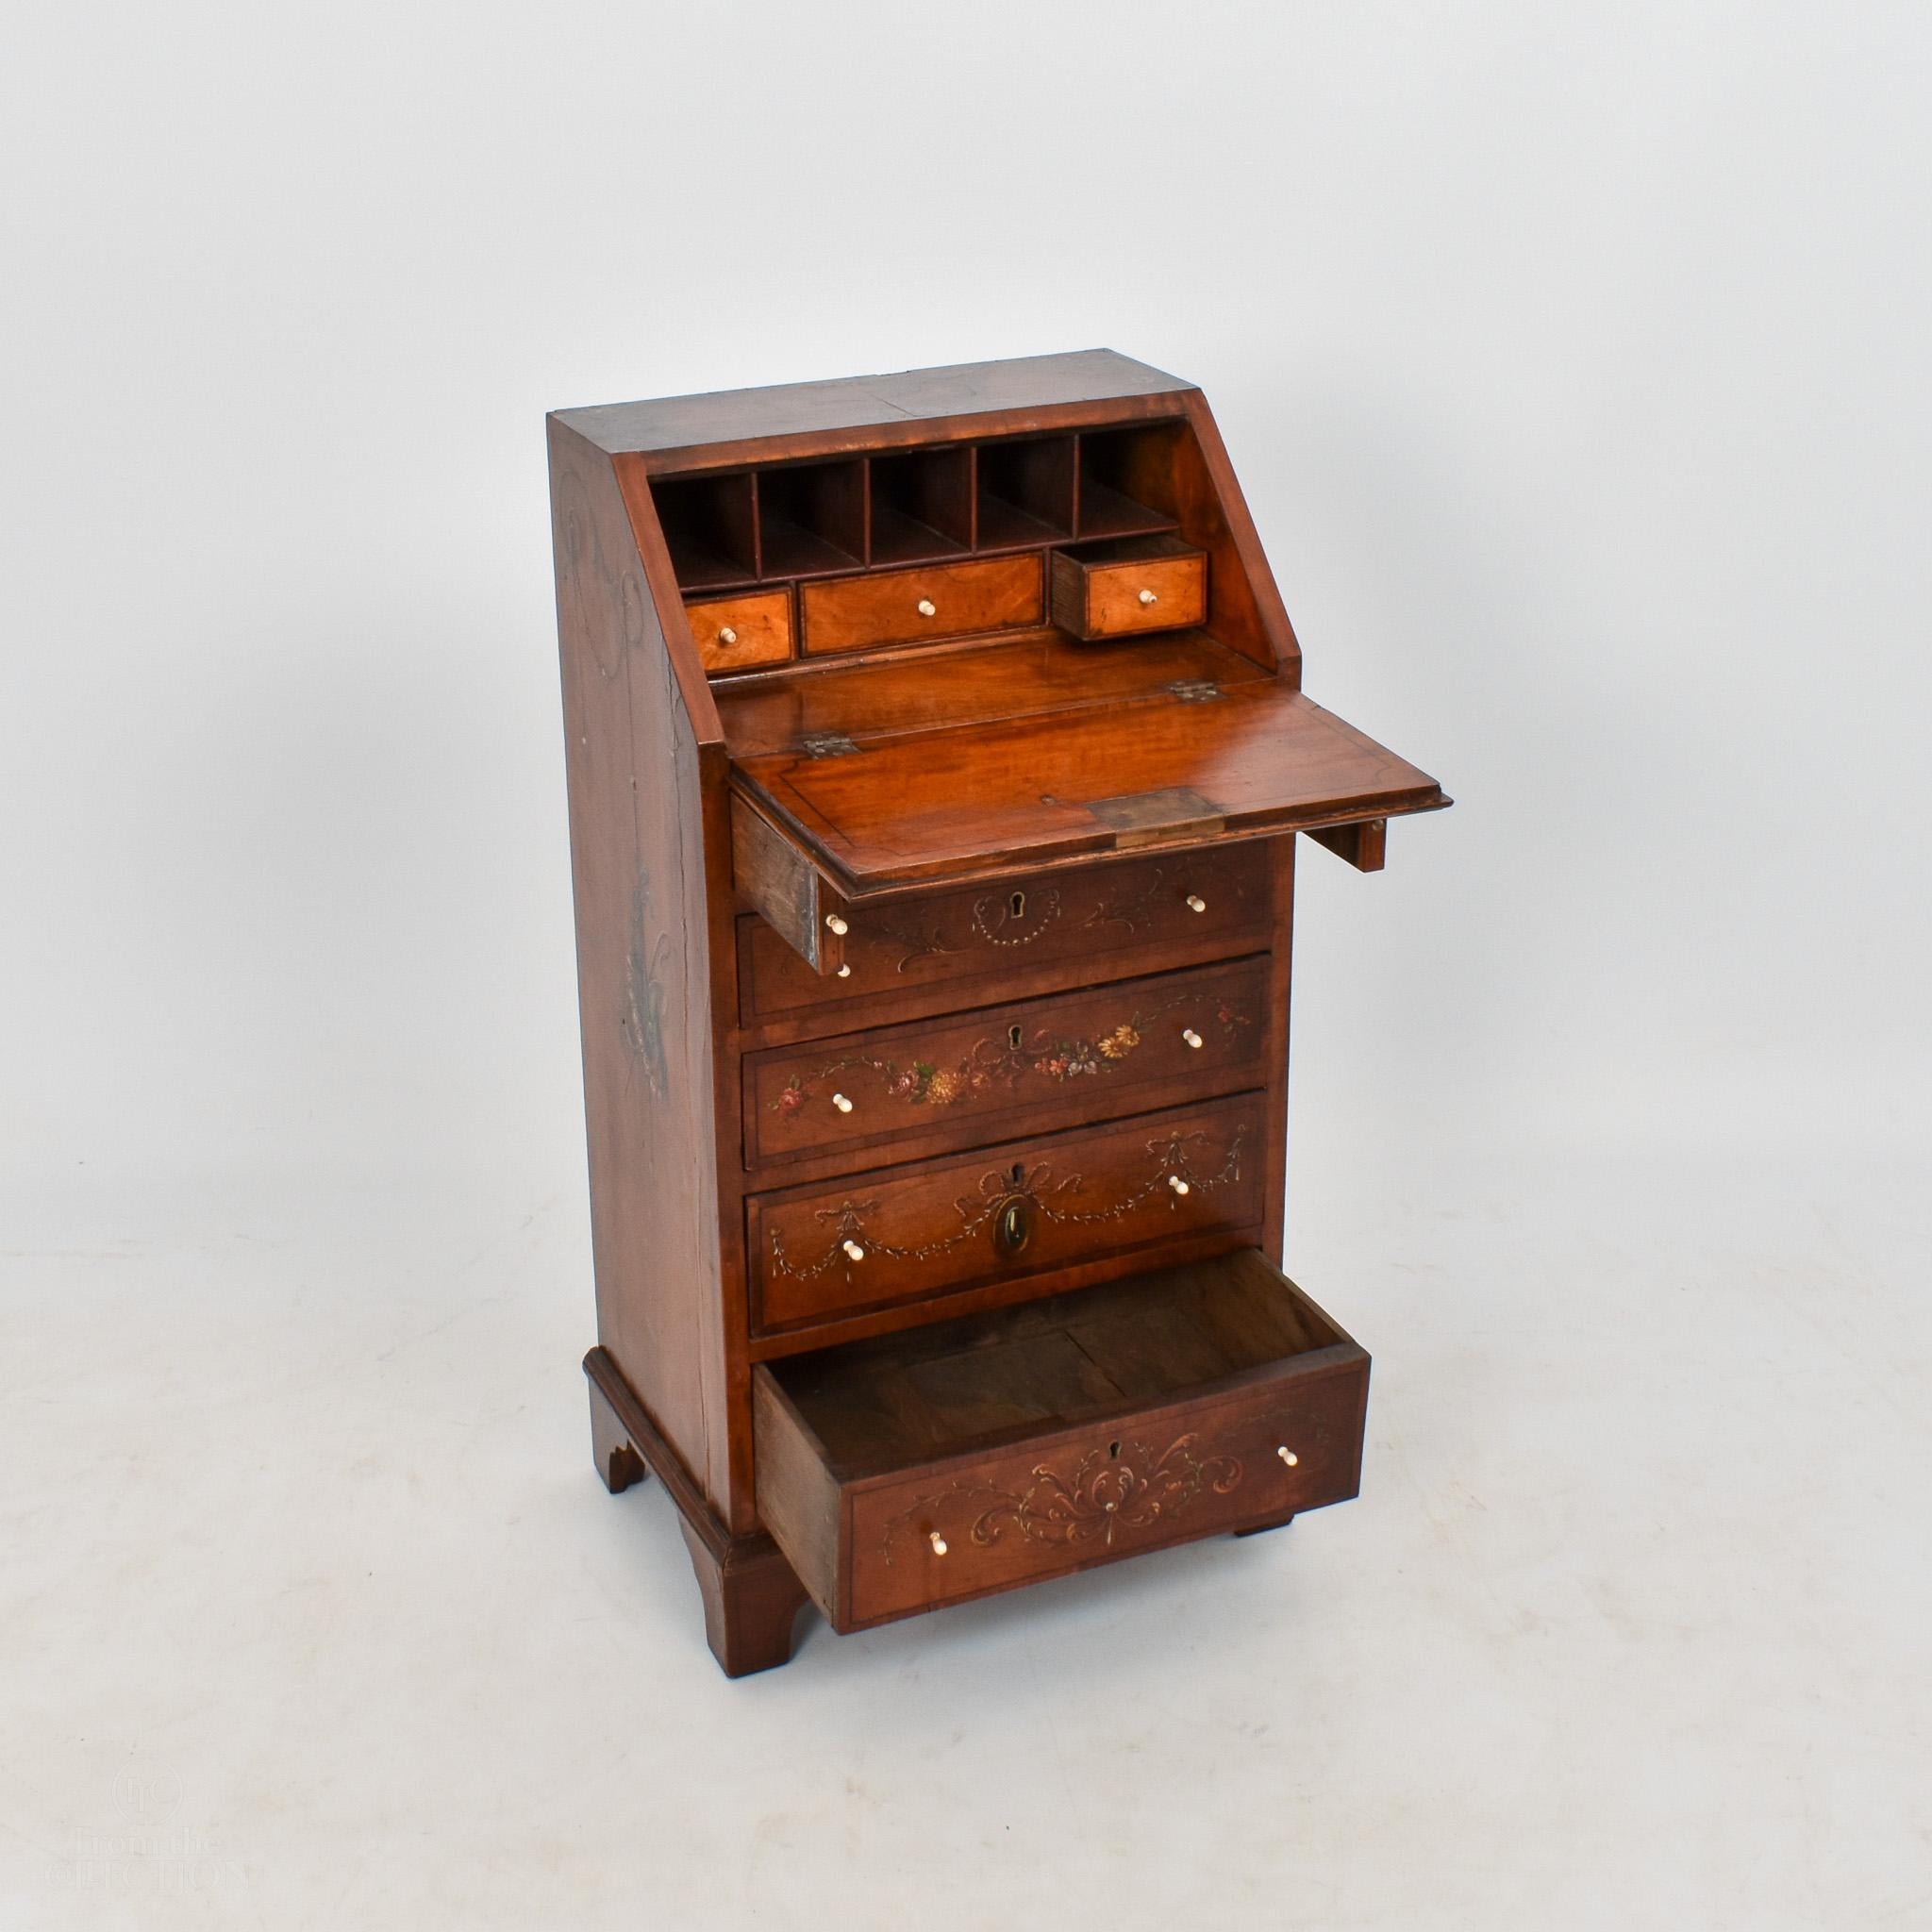 This small satinwood bureau desk circa 1770 is only 75cm tall, making it a very unique piece. It is of the George II / III period with beautifully original painted decoration of garlands of flowers and a miniature portrait to the centre of the top,